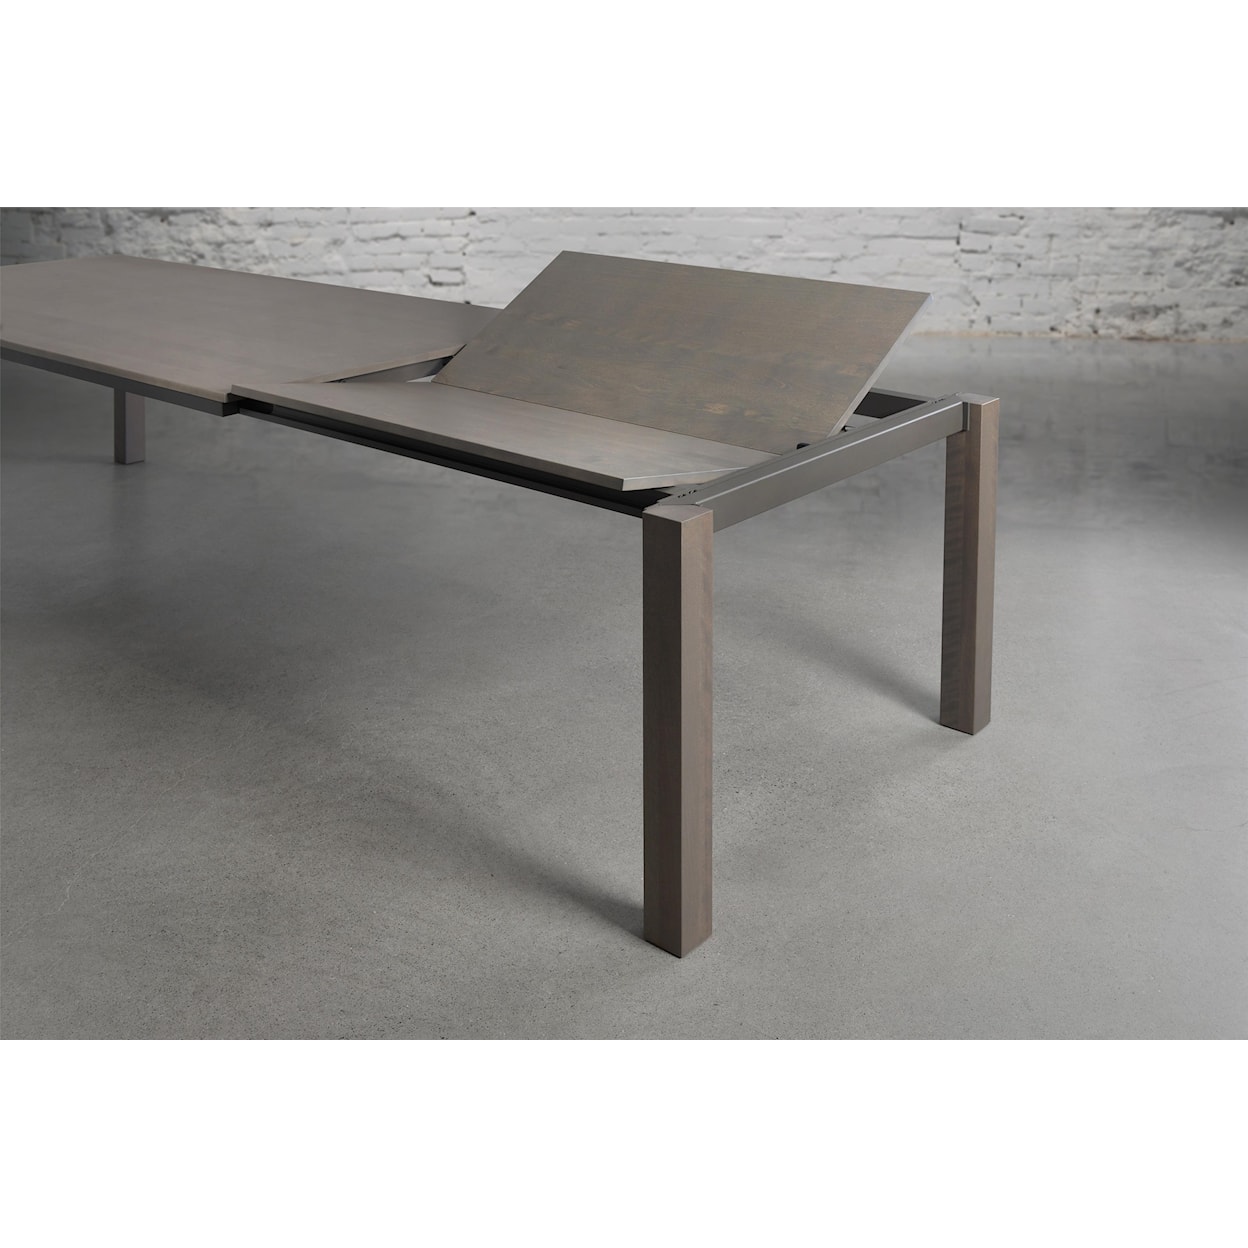 Trica Enternity ETERNITY Dining Table